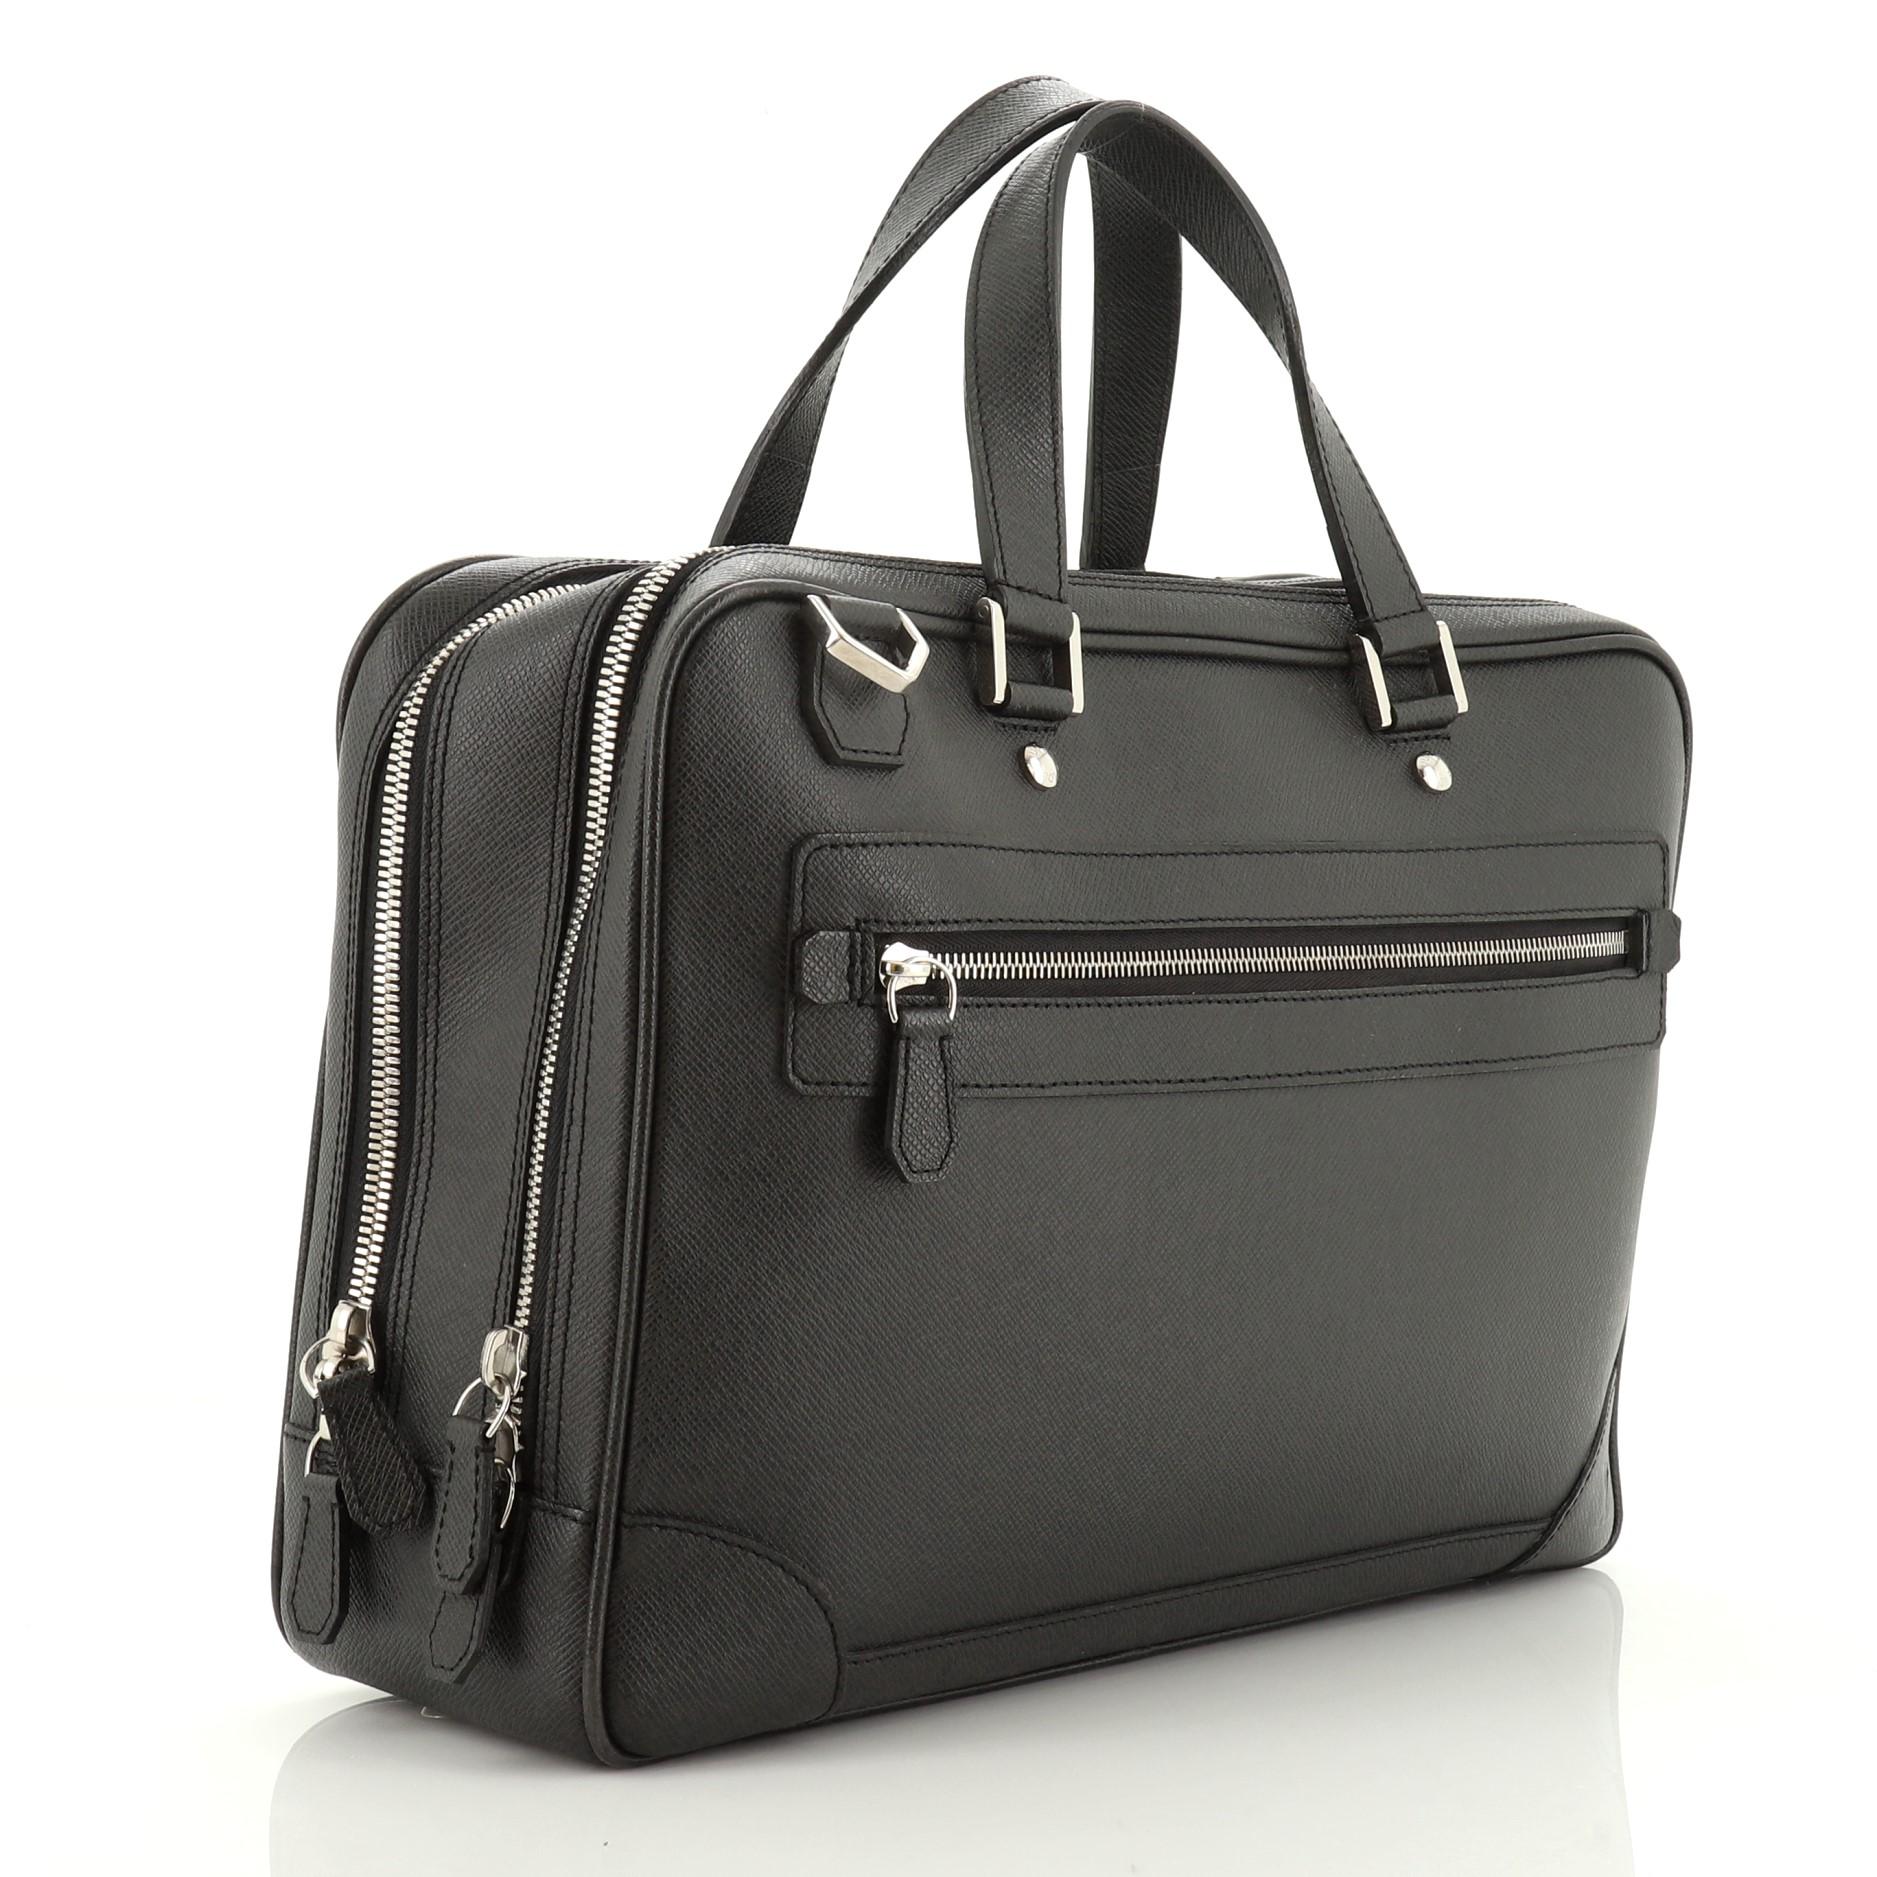 This Louis Vuitton Alexander Briefcase Taiga Leather, crafted in black taiga leather, features dual flat leather handles, exterior zip pocket and silver-tone hardware. Its zip closures open to a two-compartment black fabric interior with slip